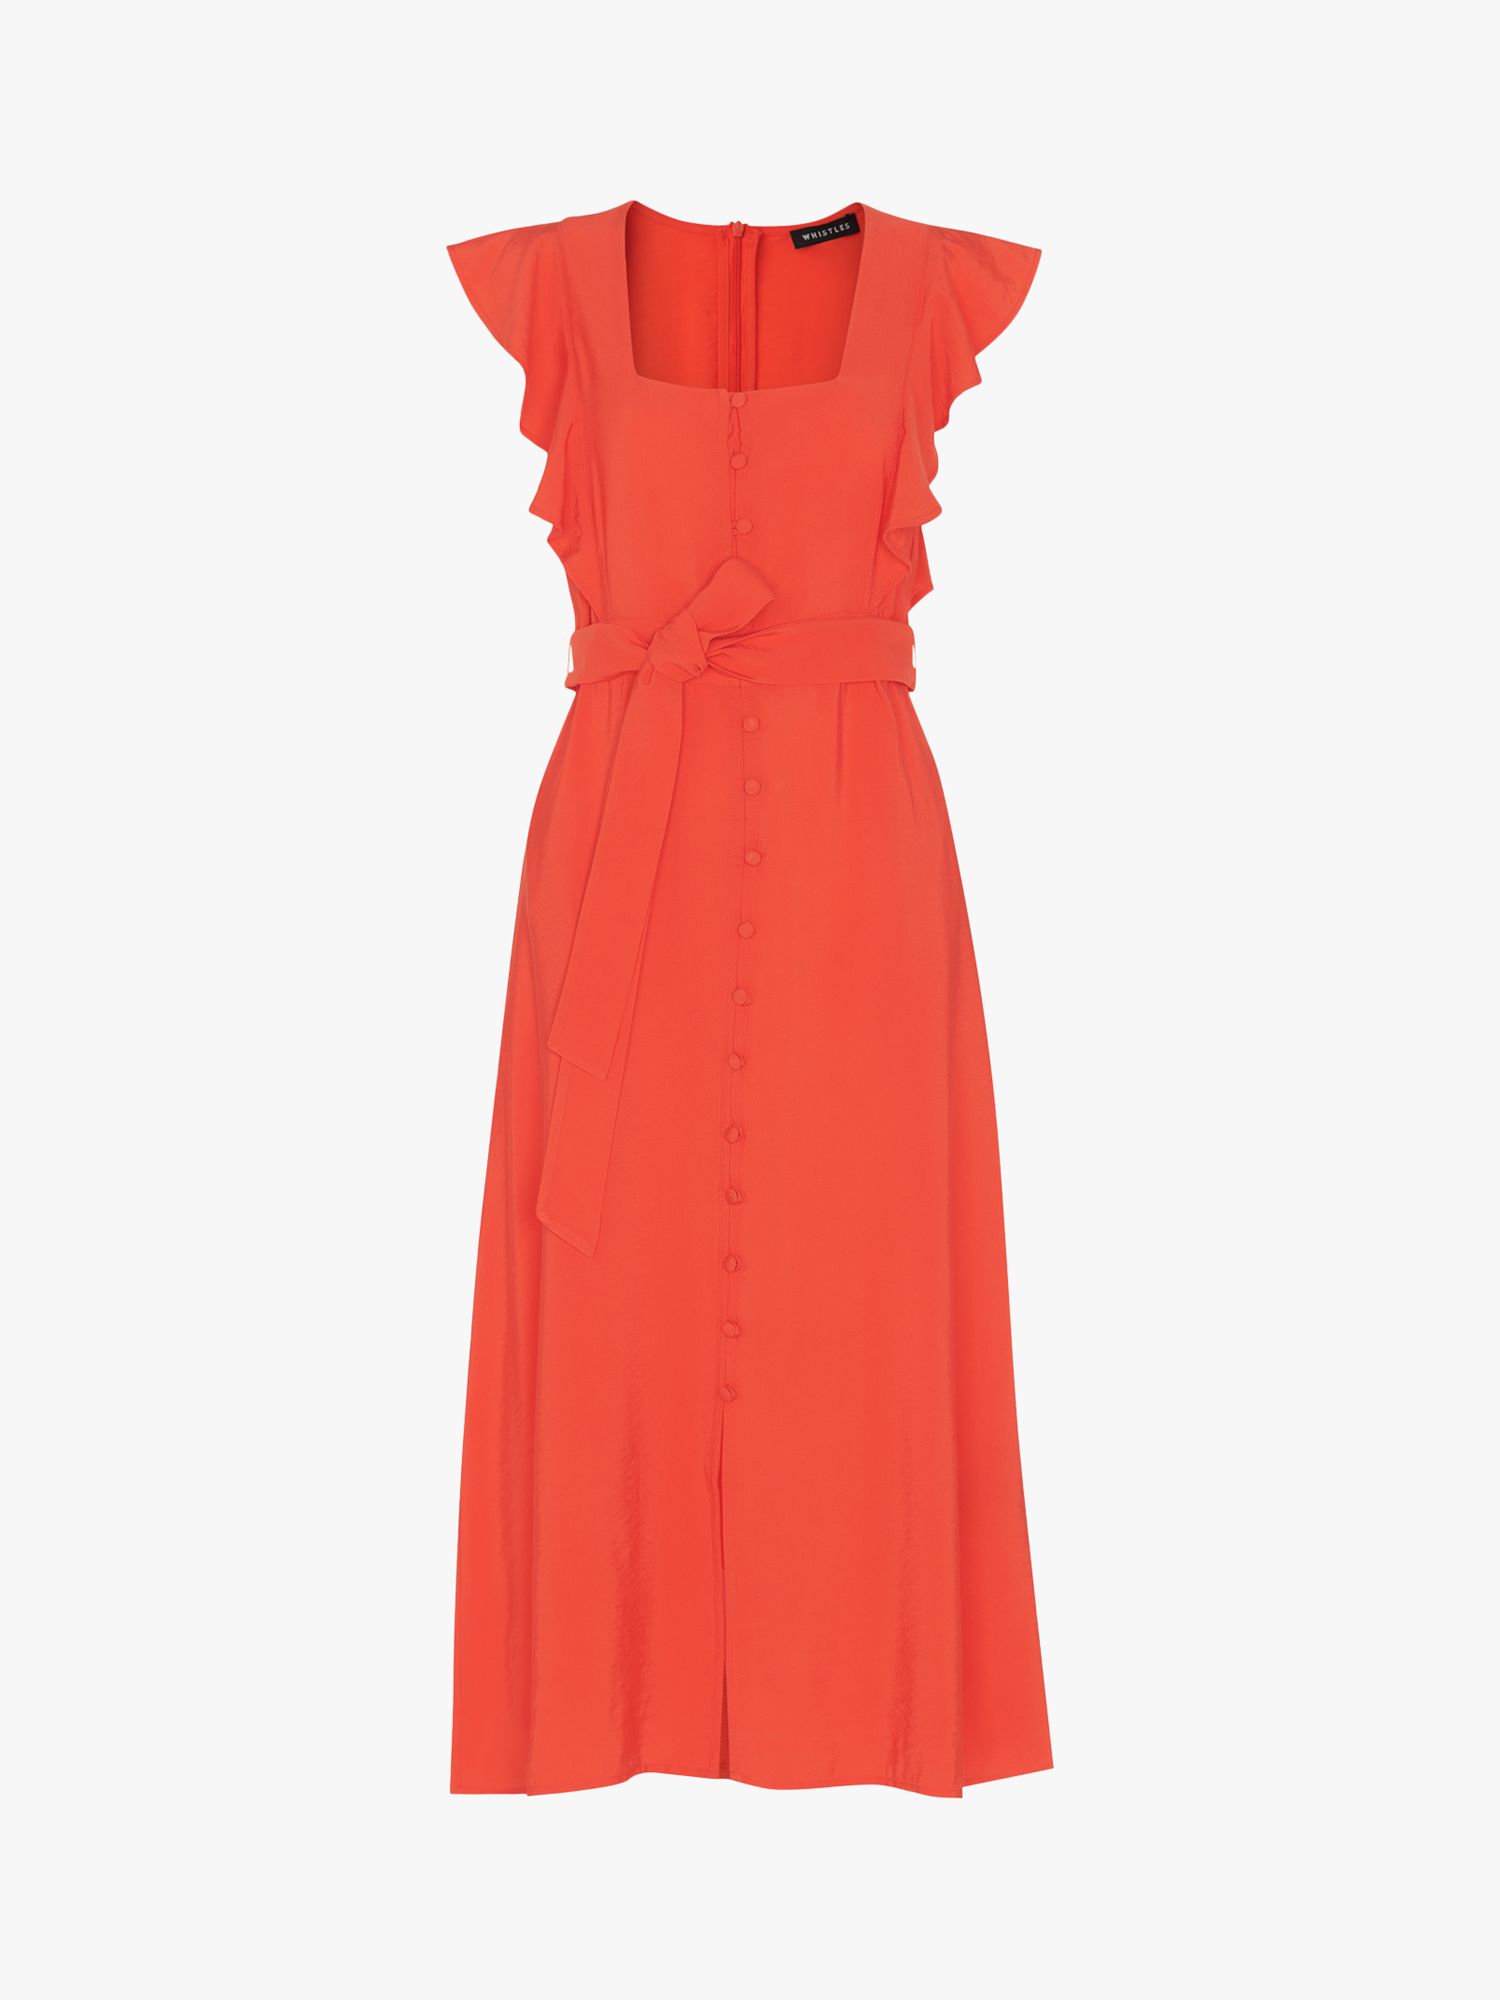 Whistles Sophie Frill Sleeve Midi Dress, Red at John Lewis & Partners